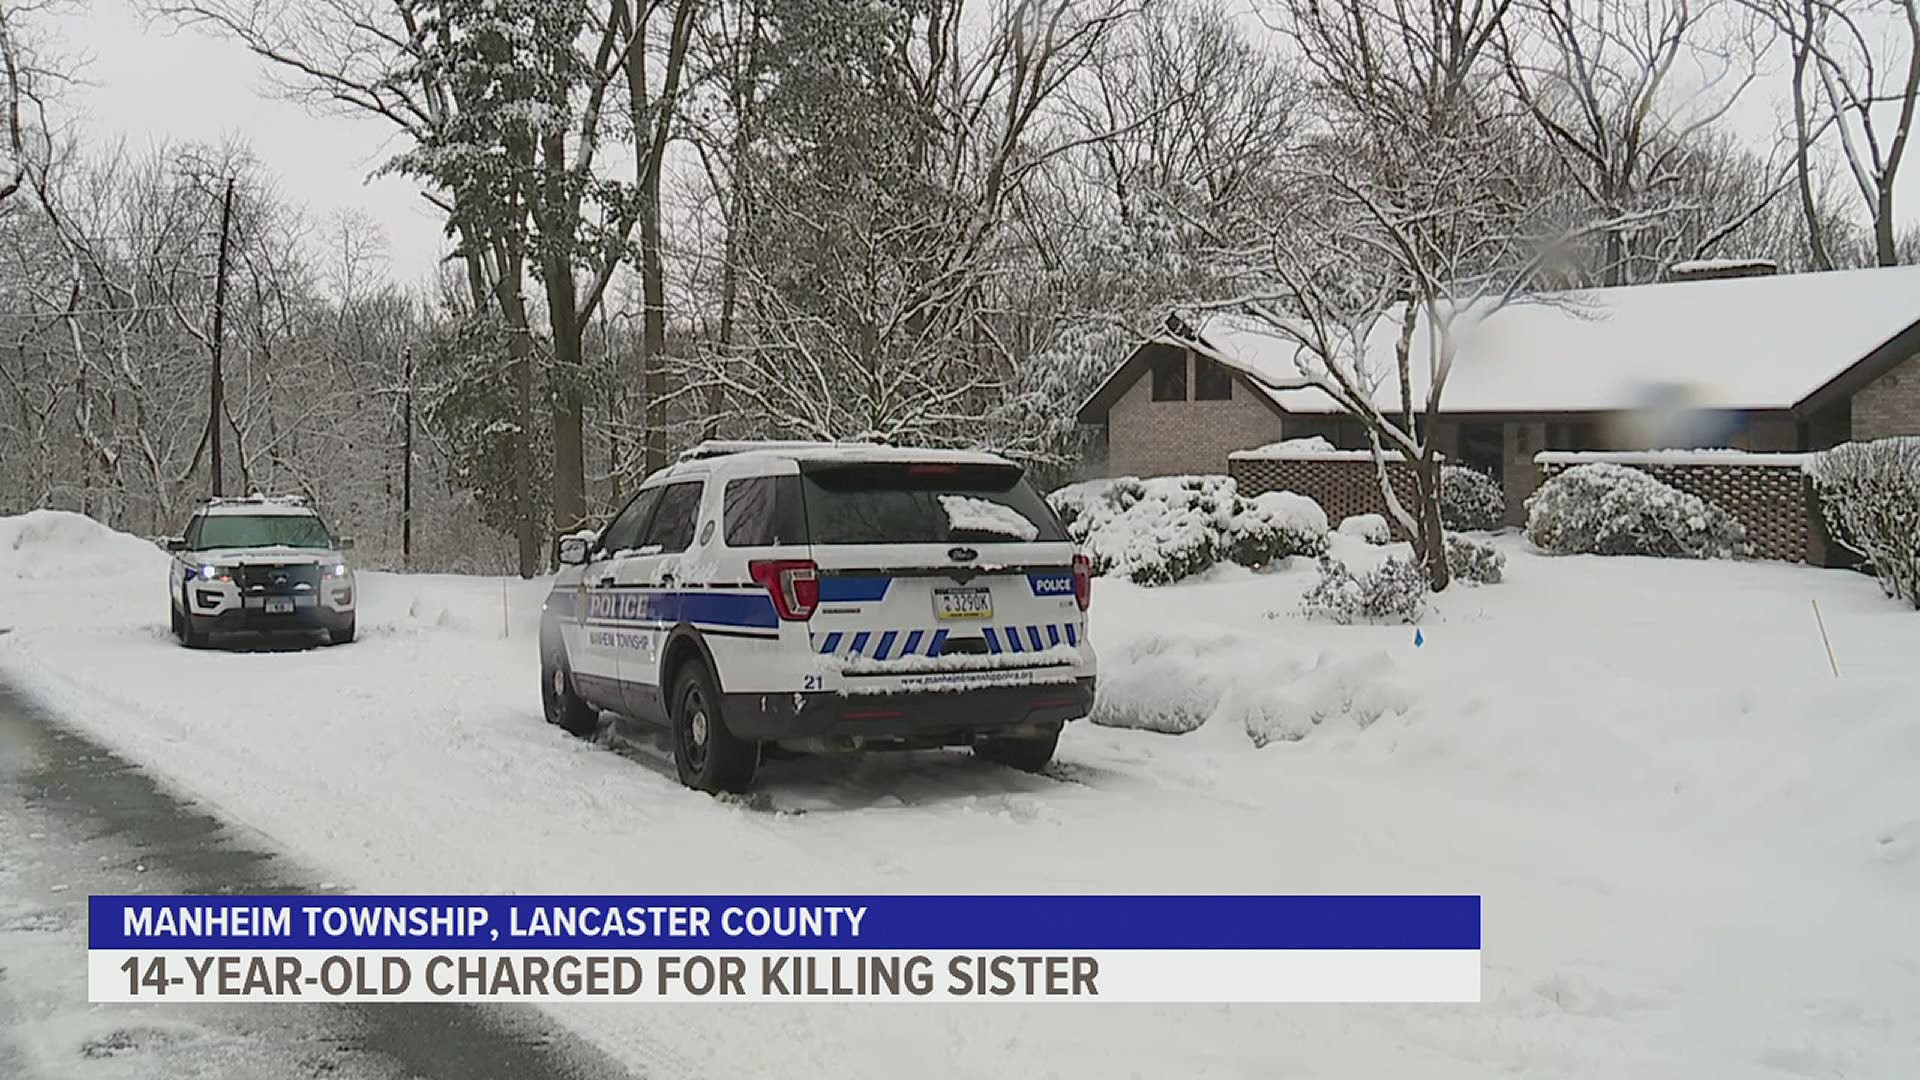 The Lancaster County District Attorney's office is charging a Manheim Township teen as an adult after calling 911 and admitting to killing her older sister.